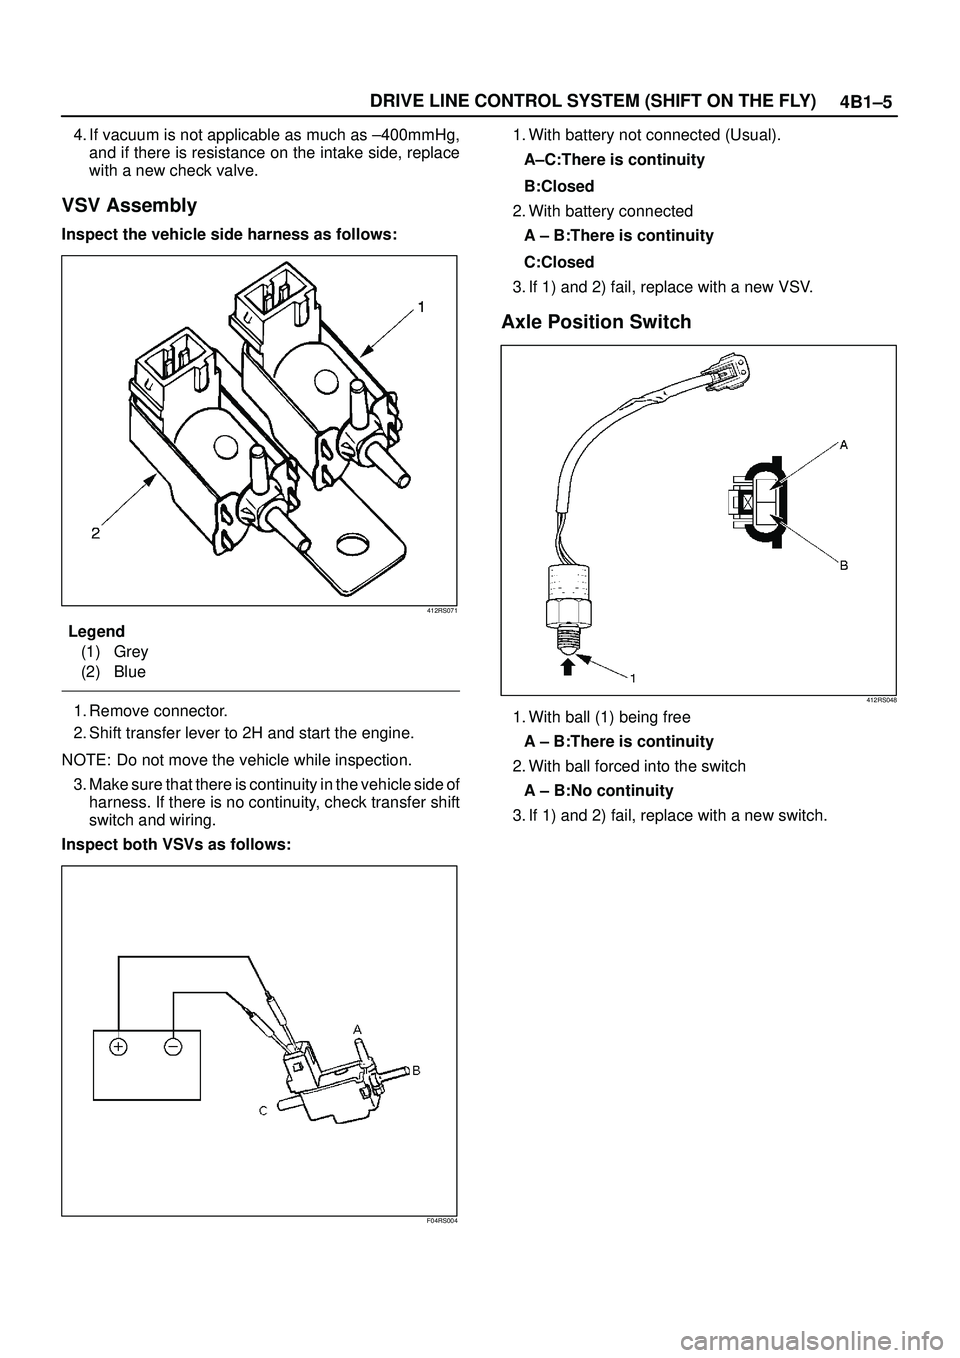 ISUZU TROOPER 1998  Service Repair Manual 4B1±5 DRIVE LINE CONTROL SYSTEM (SHIFT ON THE FLY)
4. If vacuum is not applicable as much as ±400mmHg,
and if there is resistance on the intake side, replace
with a new check valve.
VSV Assembly
Ins